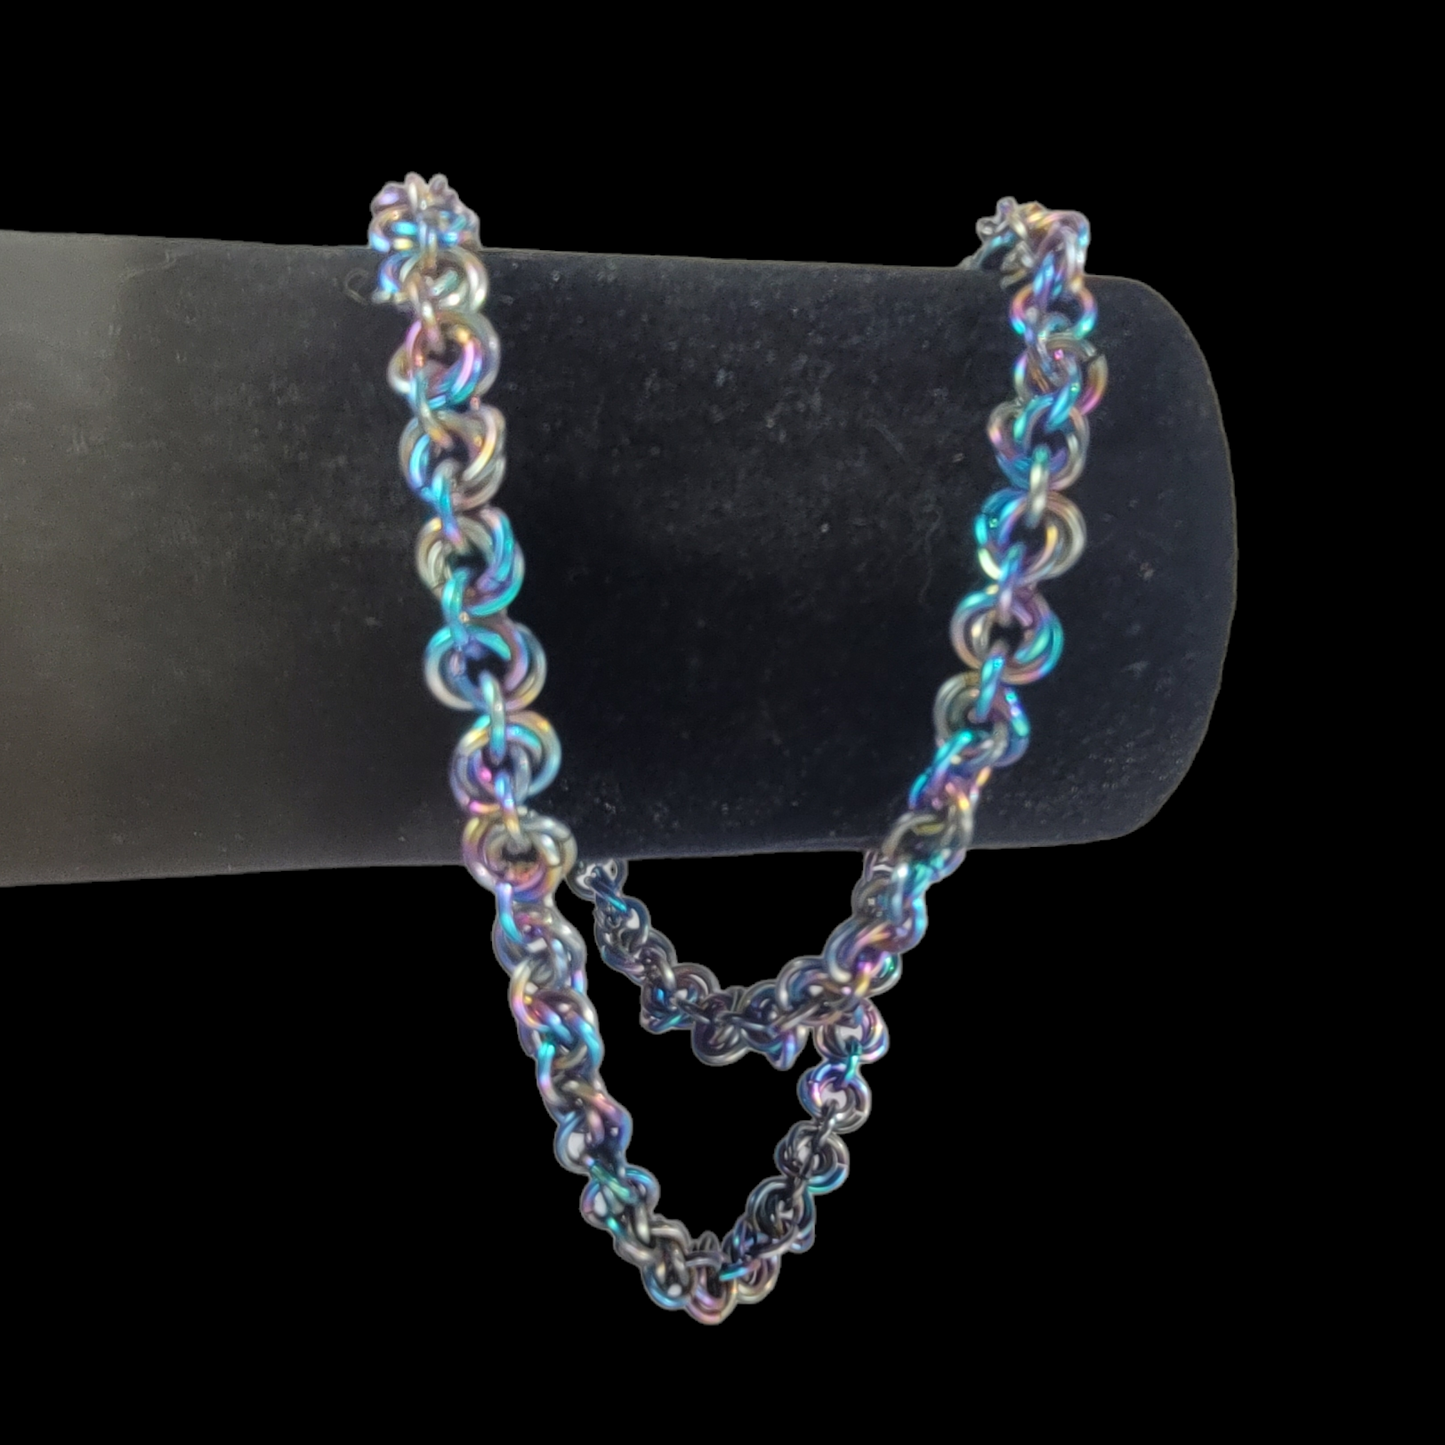 Rainbow rosette chainmail necklace